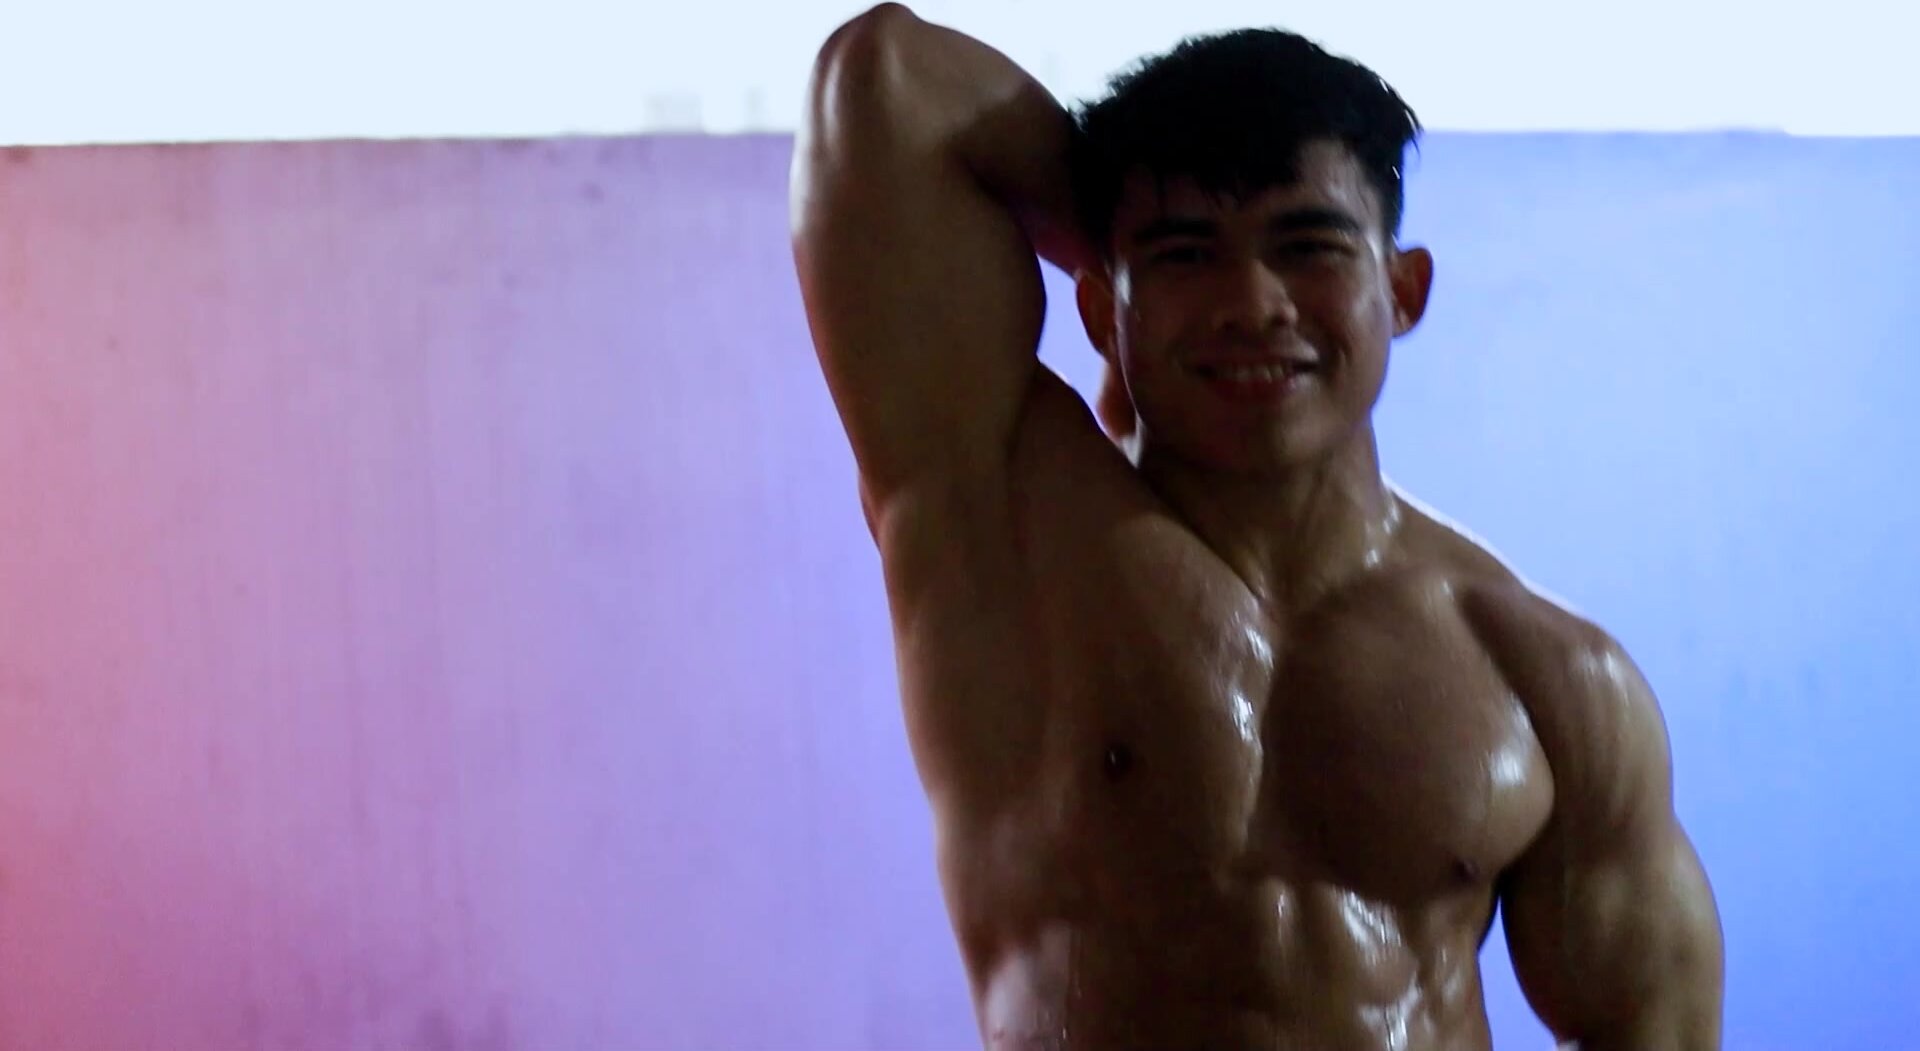 Asian Muscle- Nippel Show - Anatomy ep. 144